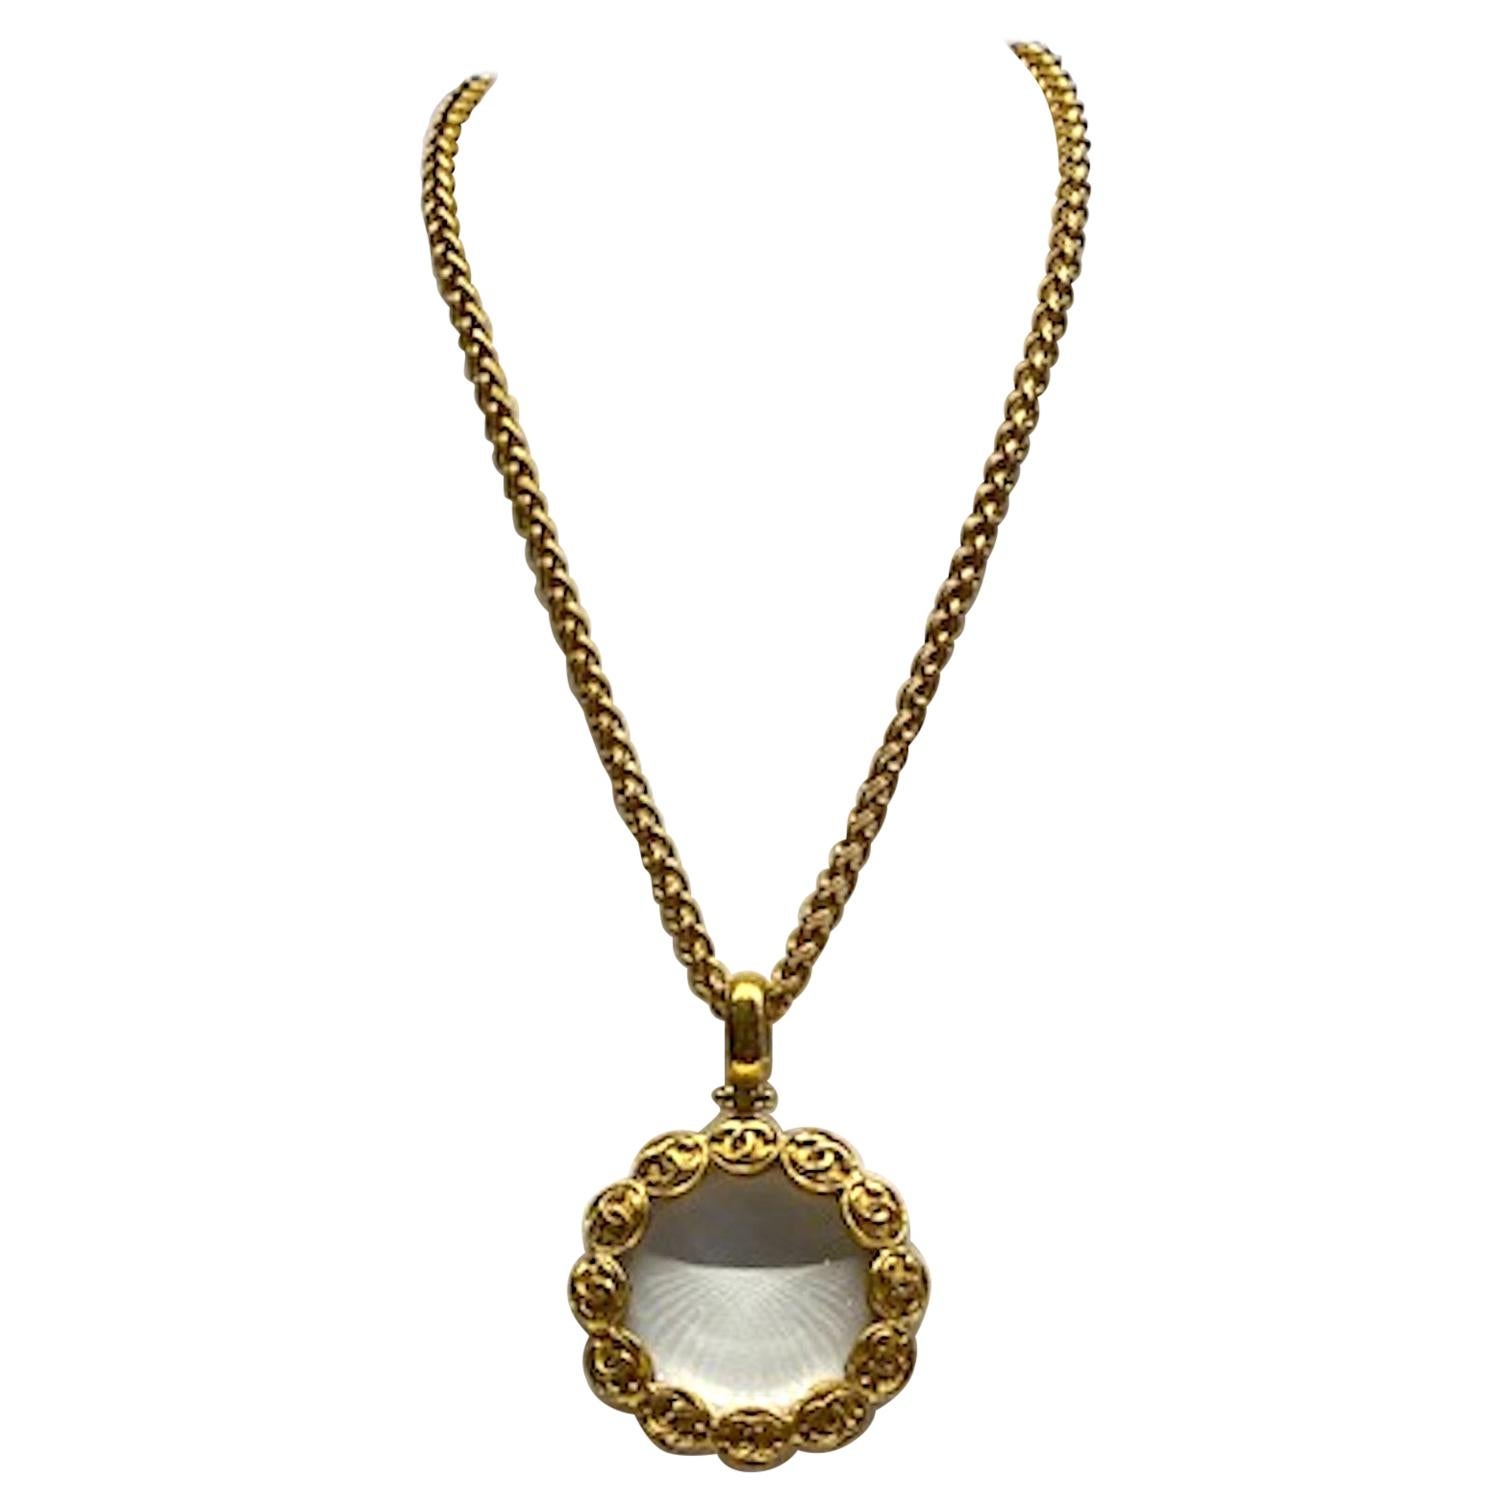 Chanel Magnifying Lens Pendant Necklace, Autumn 1997 Collection